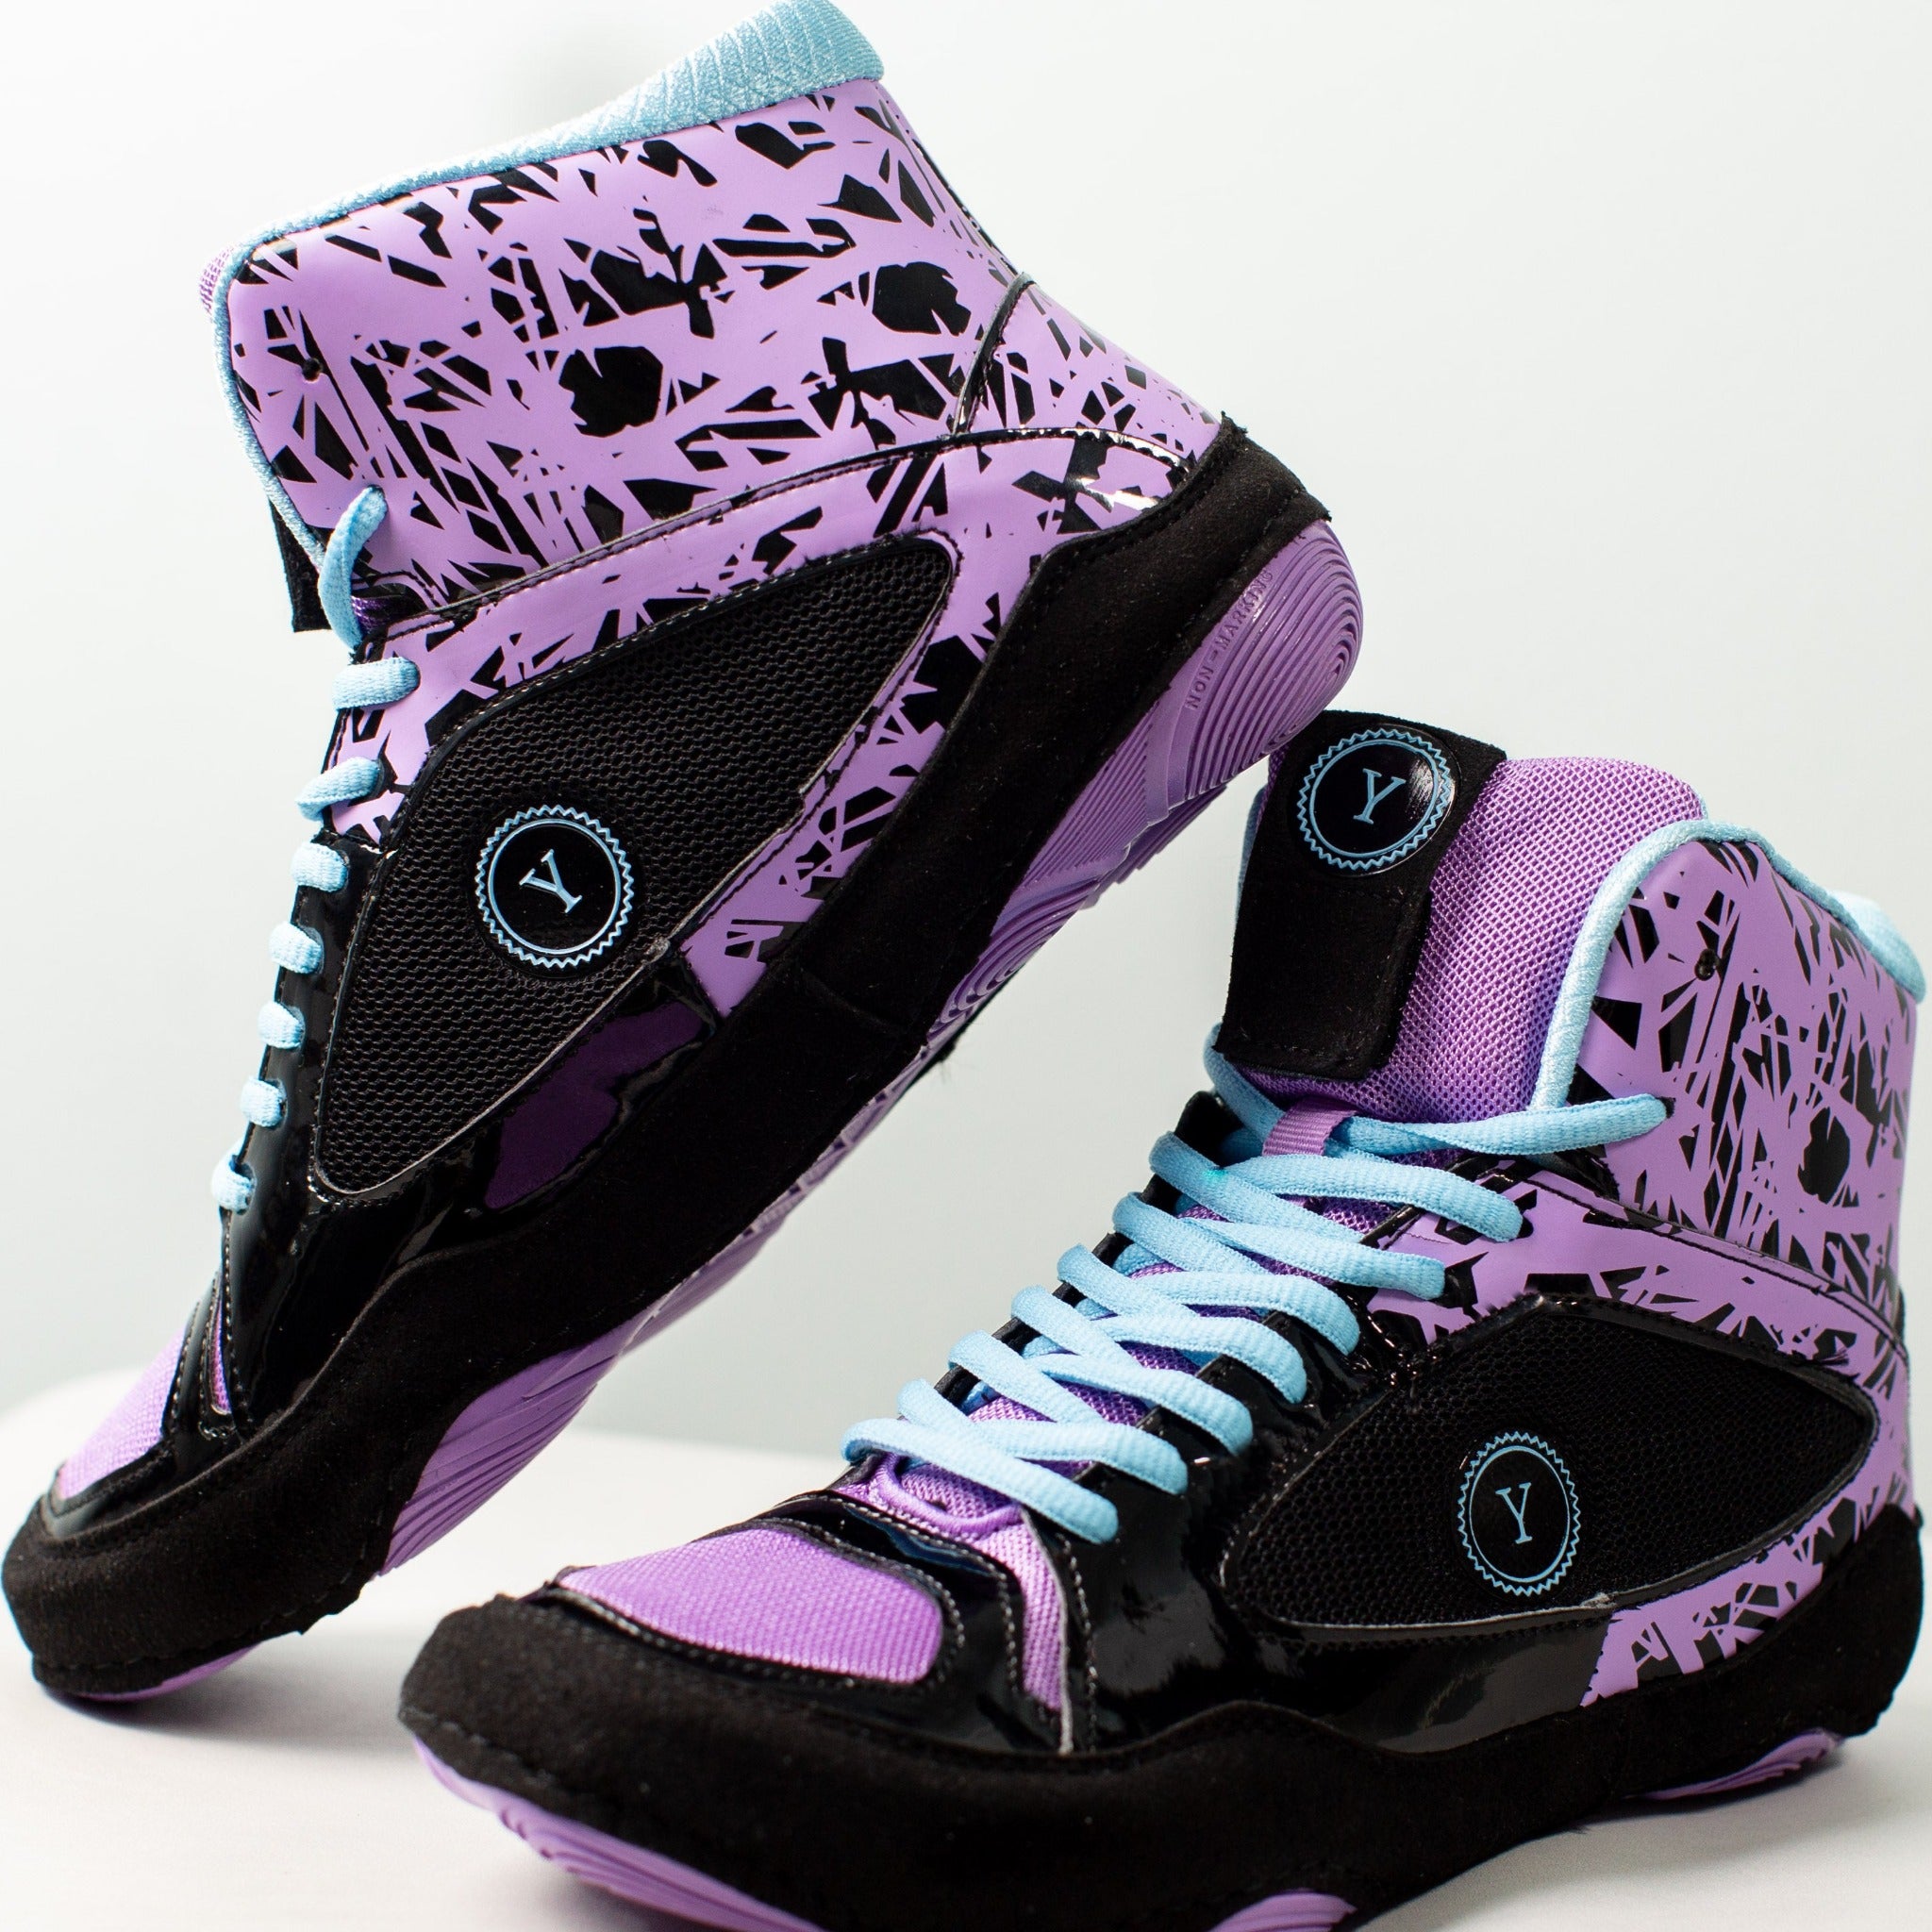 DEFIANT 1 pink/grey/black wrestling shoes for youth girls and women. Always  Free Shipping!